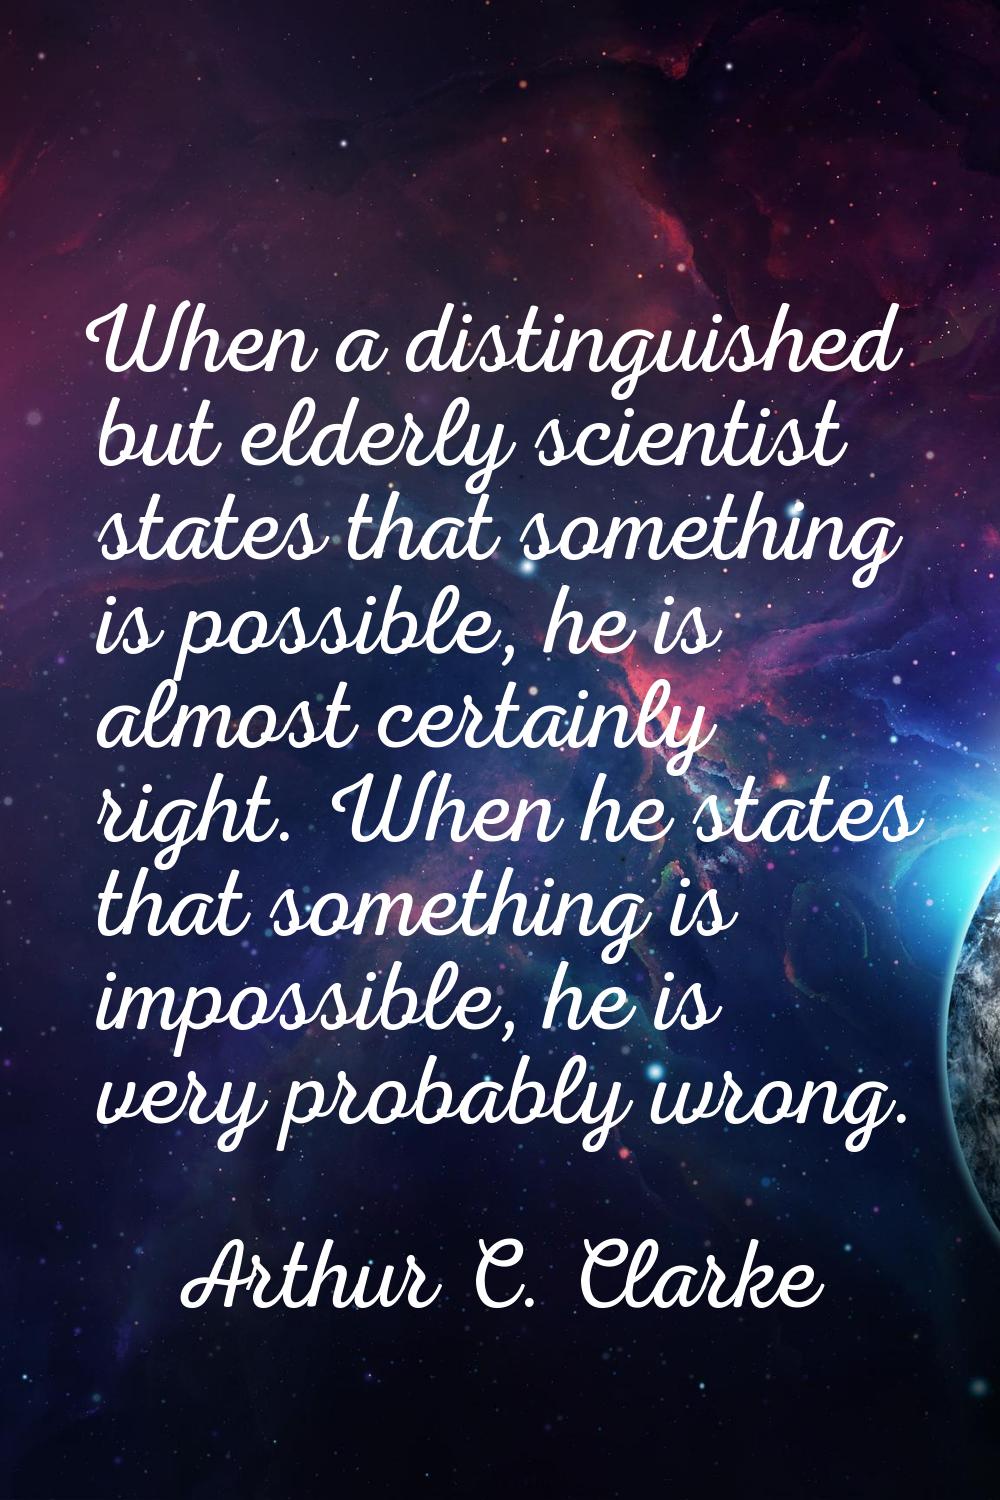 When a distinguished but elderly scientist states that something is possible, he is almost certainl